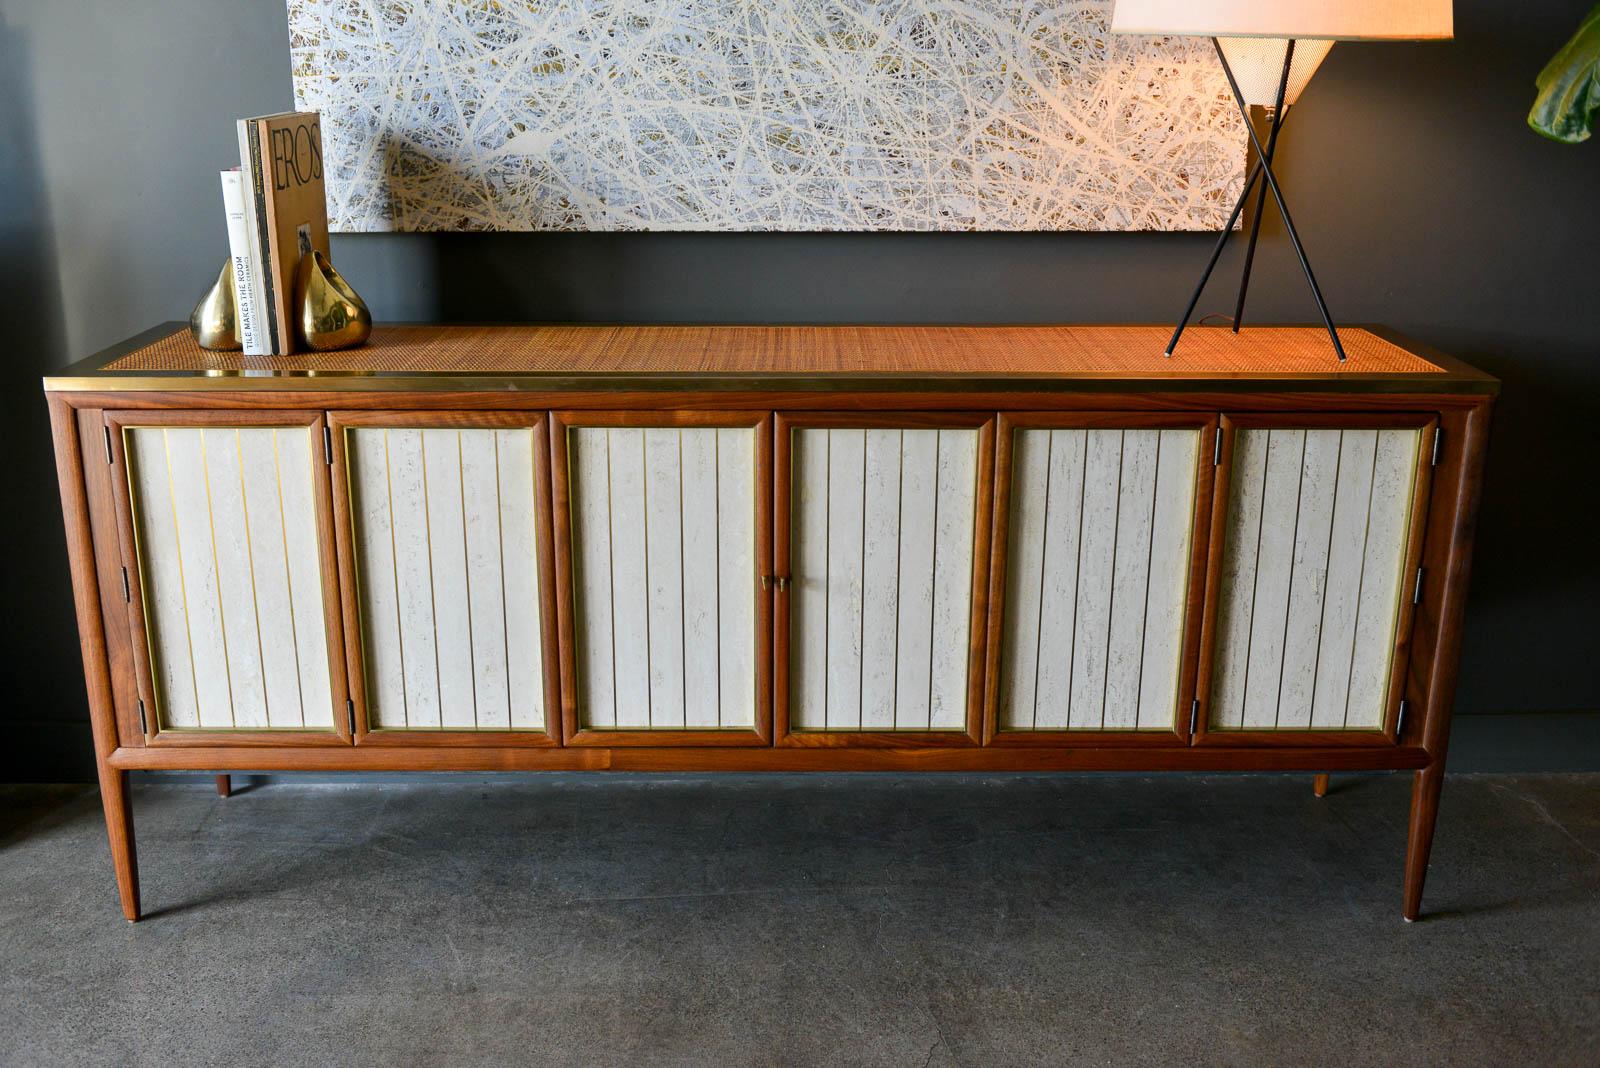 Bert England walnut, cane, brass and travertine credenza, circa 1955. One of the most beautiful pieces you will ever see with exceptional craftsmanship and design, this beautiful walnut credenza checks all the boxes. Made of solid walnut with cane